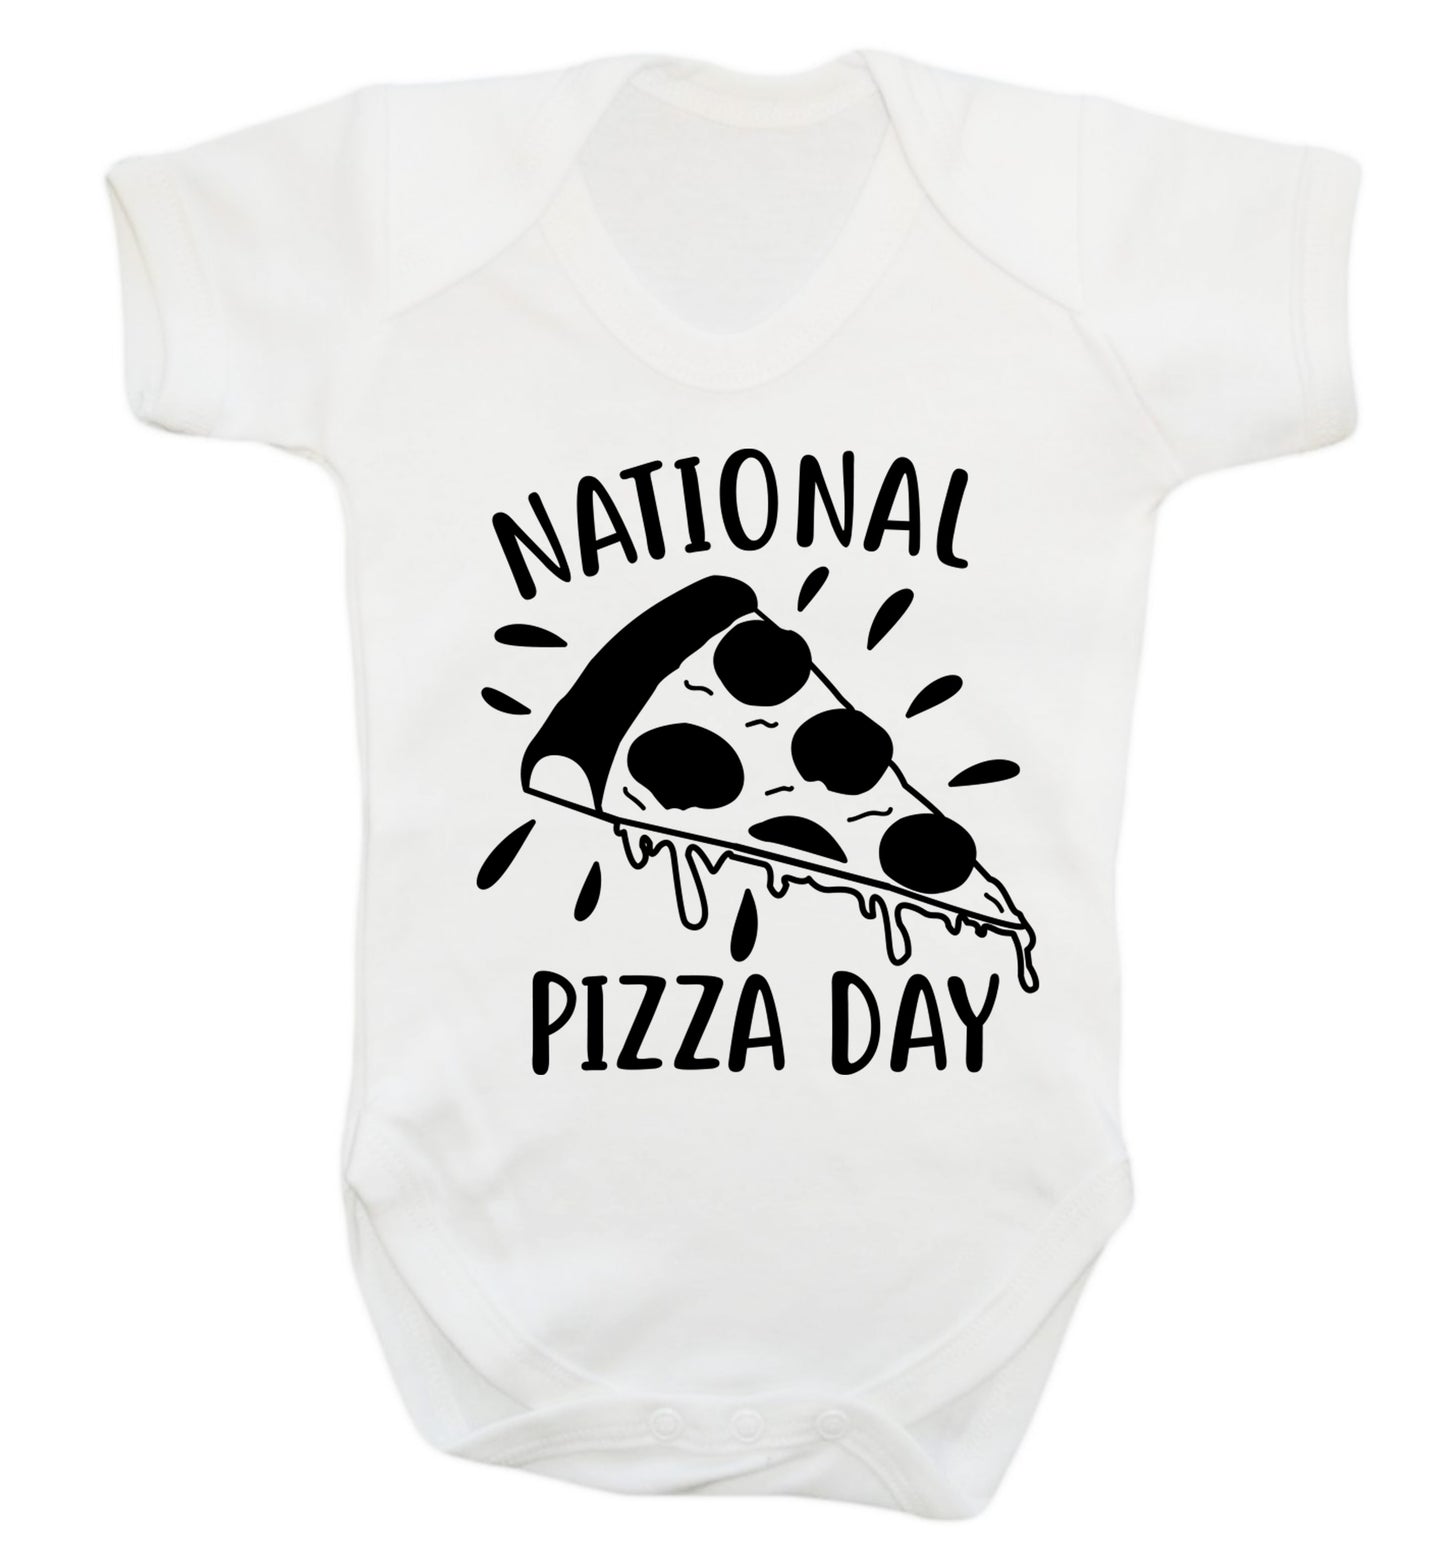 National pizza day Baby Vest white 18-24 months